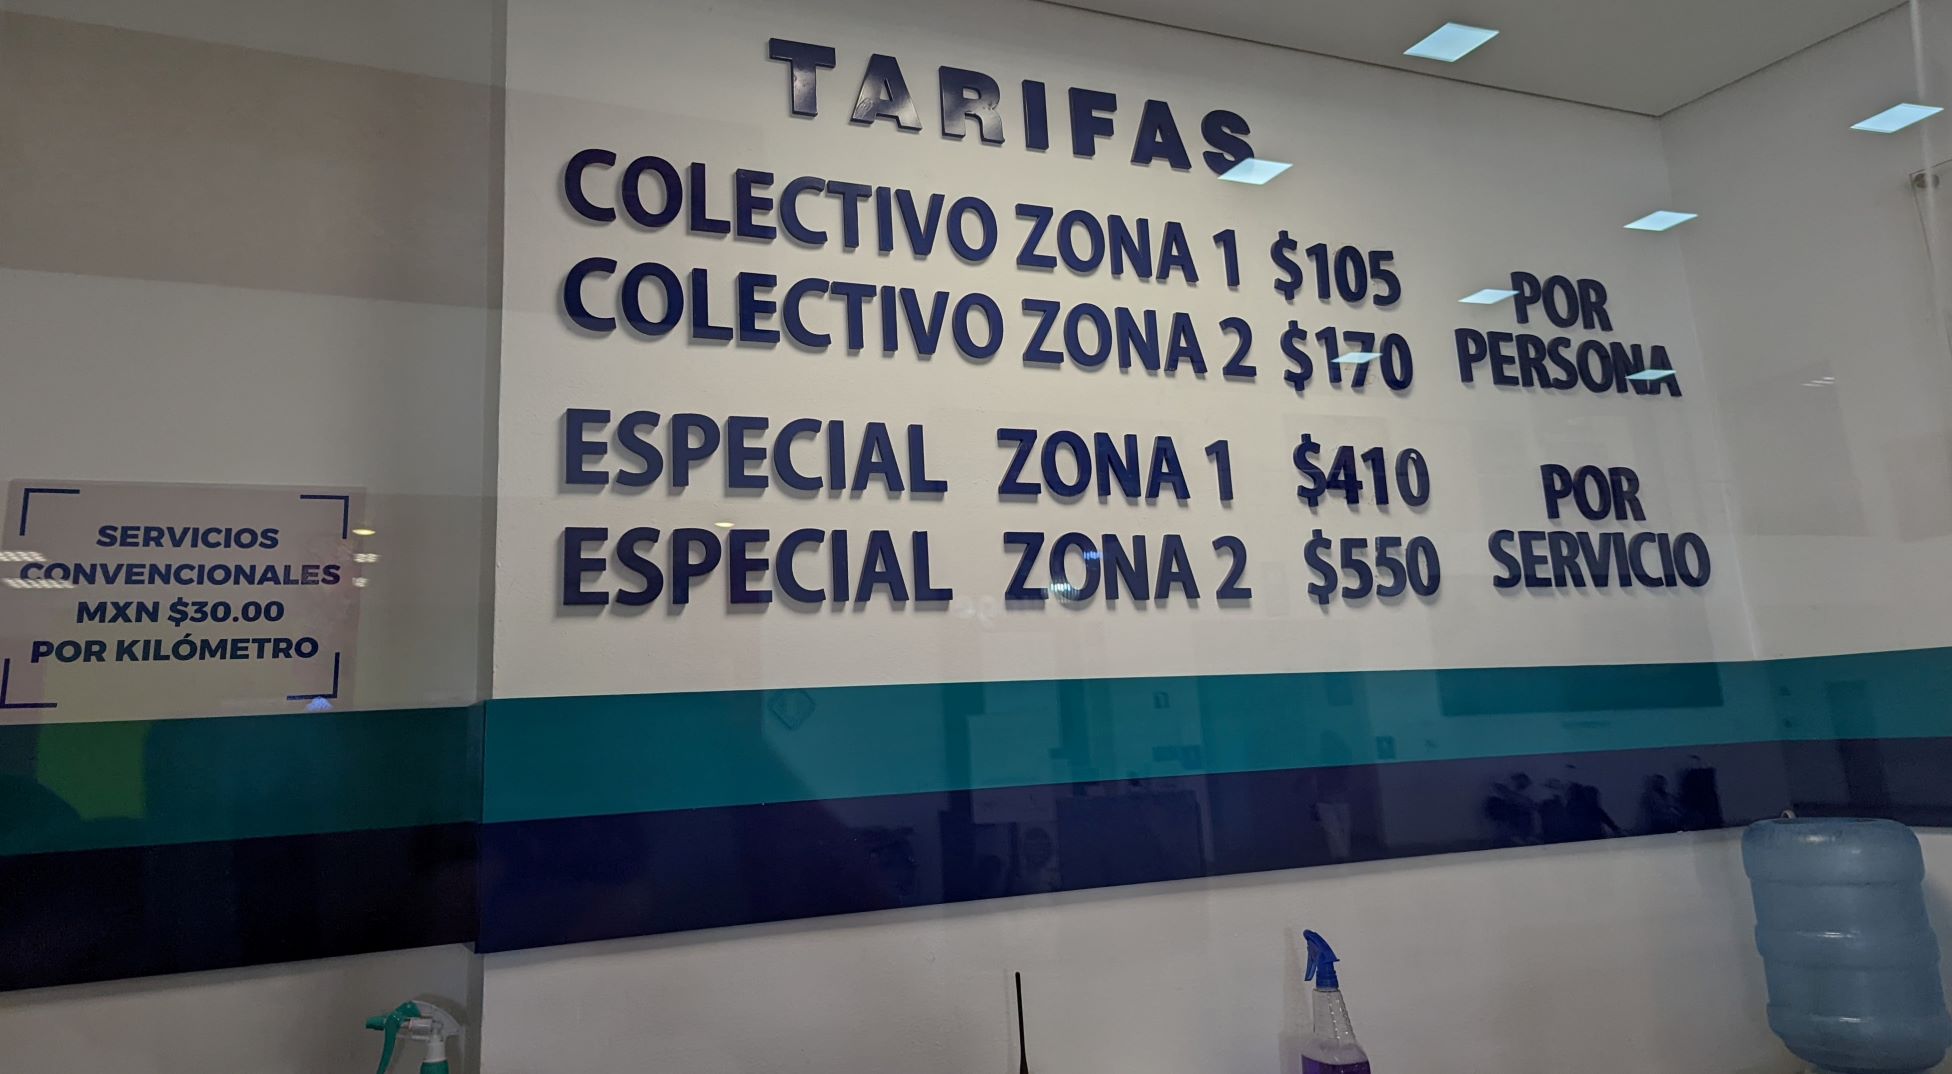 Cost of taxis at the airport - colectivos are 105 or 170 pesos as of June 2022